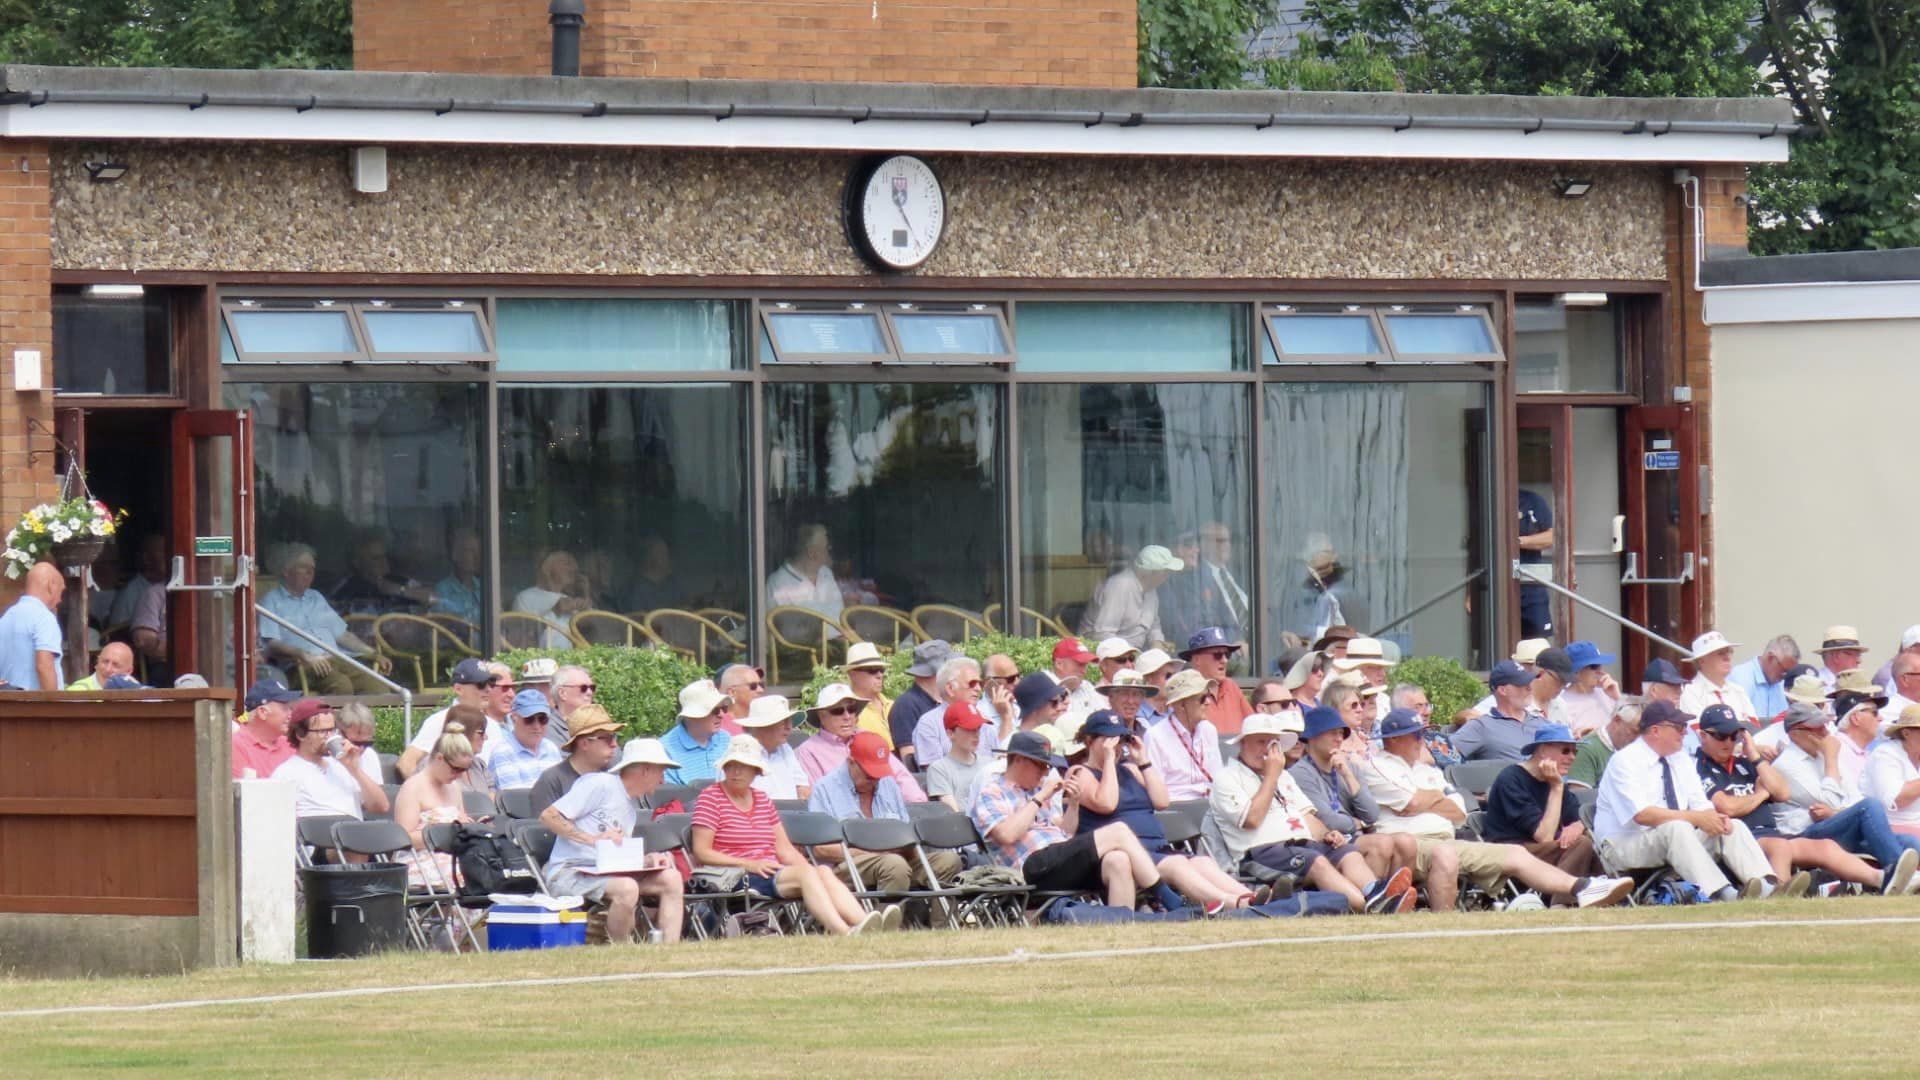 Lancashire v Hampshire County Cricket at Southport and Birkdale Sports Club. Photo by Andrew Brown Stand Up For Southport